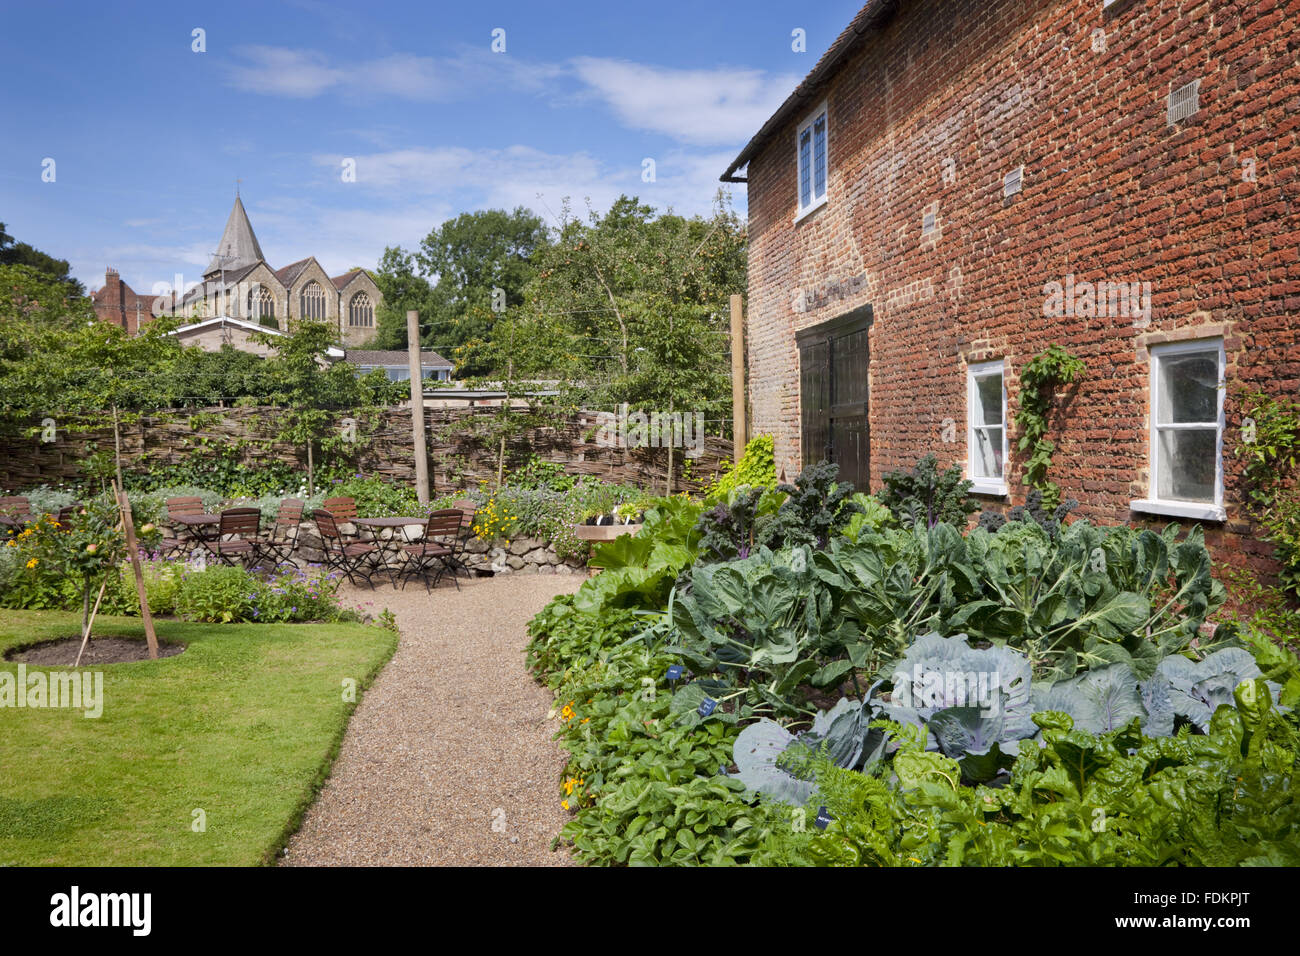 The Kitchen bed against the Coach House with vegetables growing in August at Quebec House, Westerham, Kent. The church in the distance is not National Trust. Stock Photo